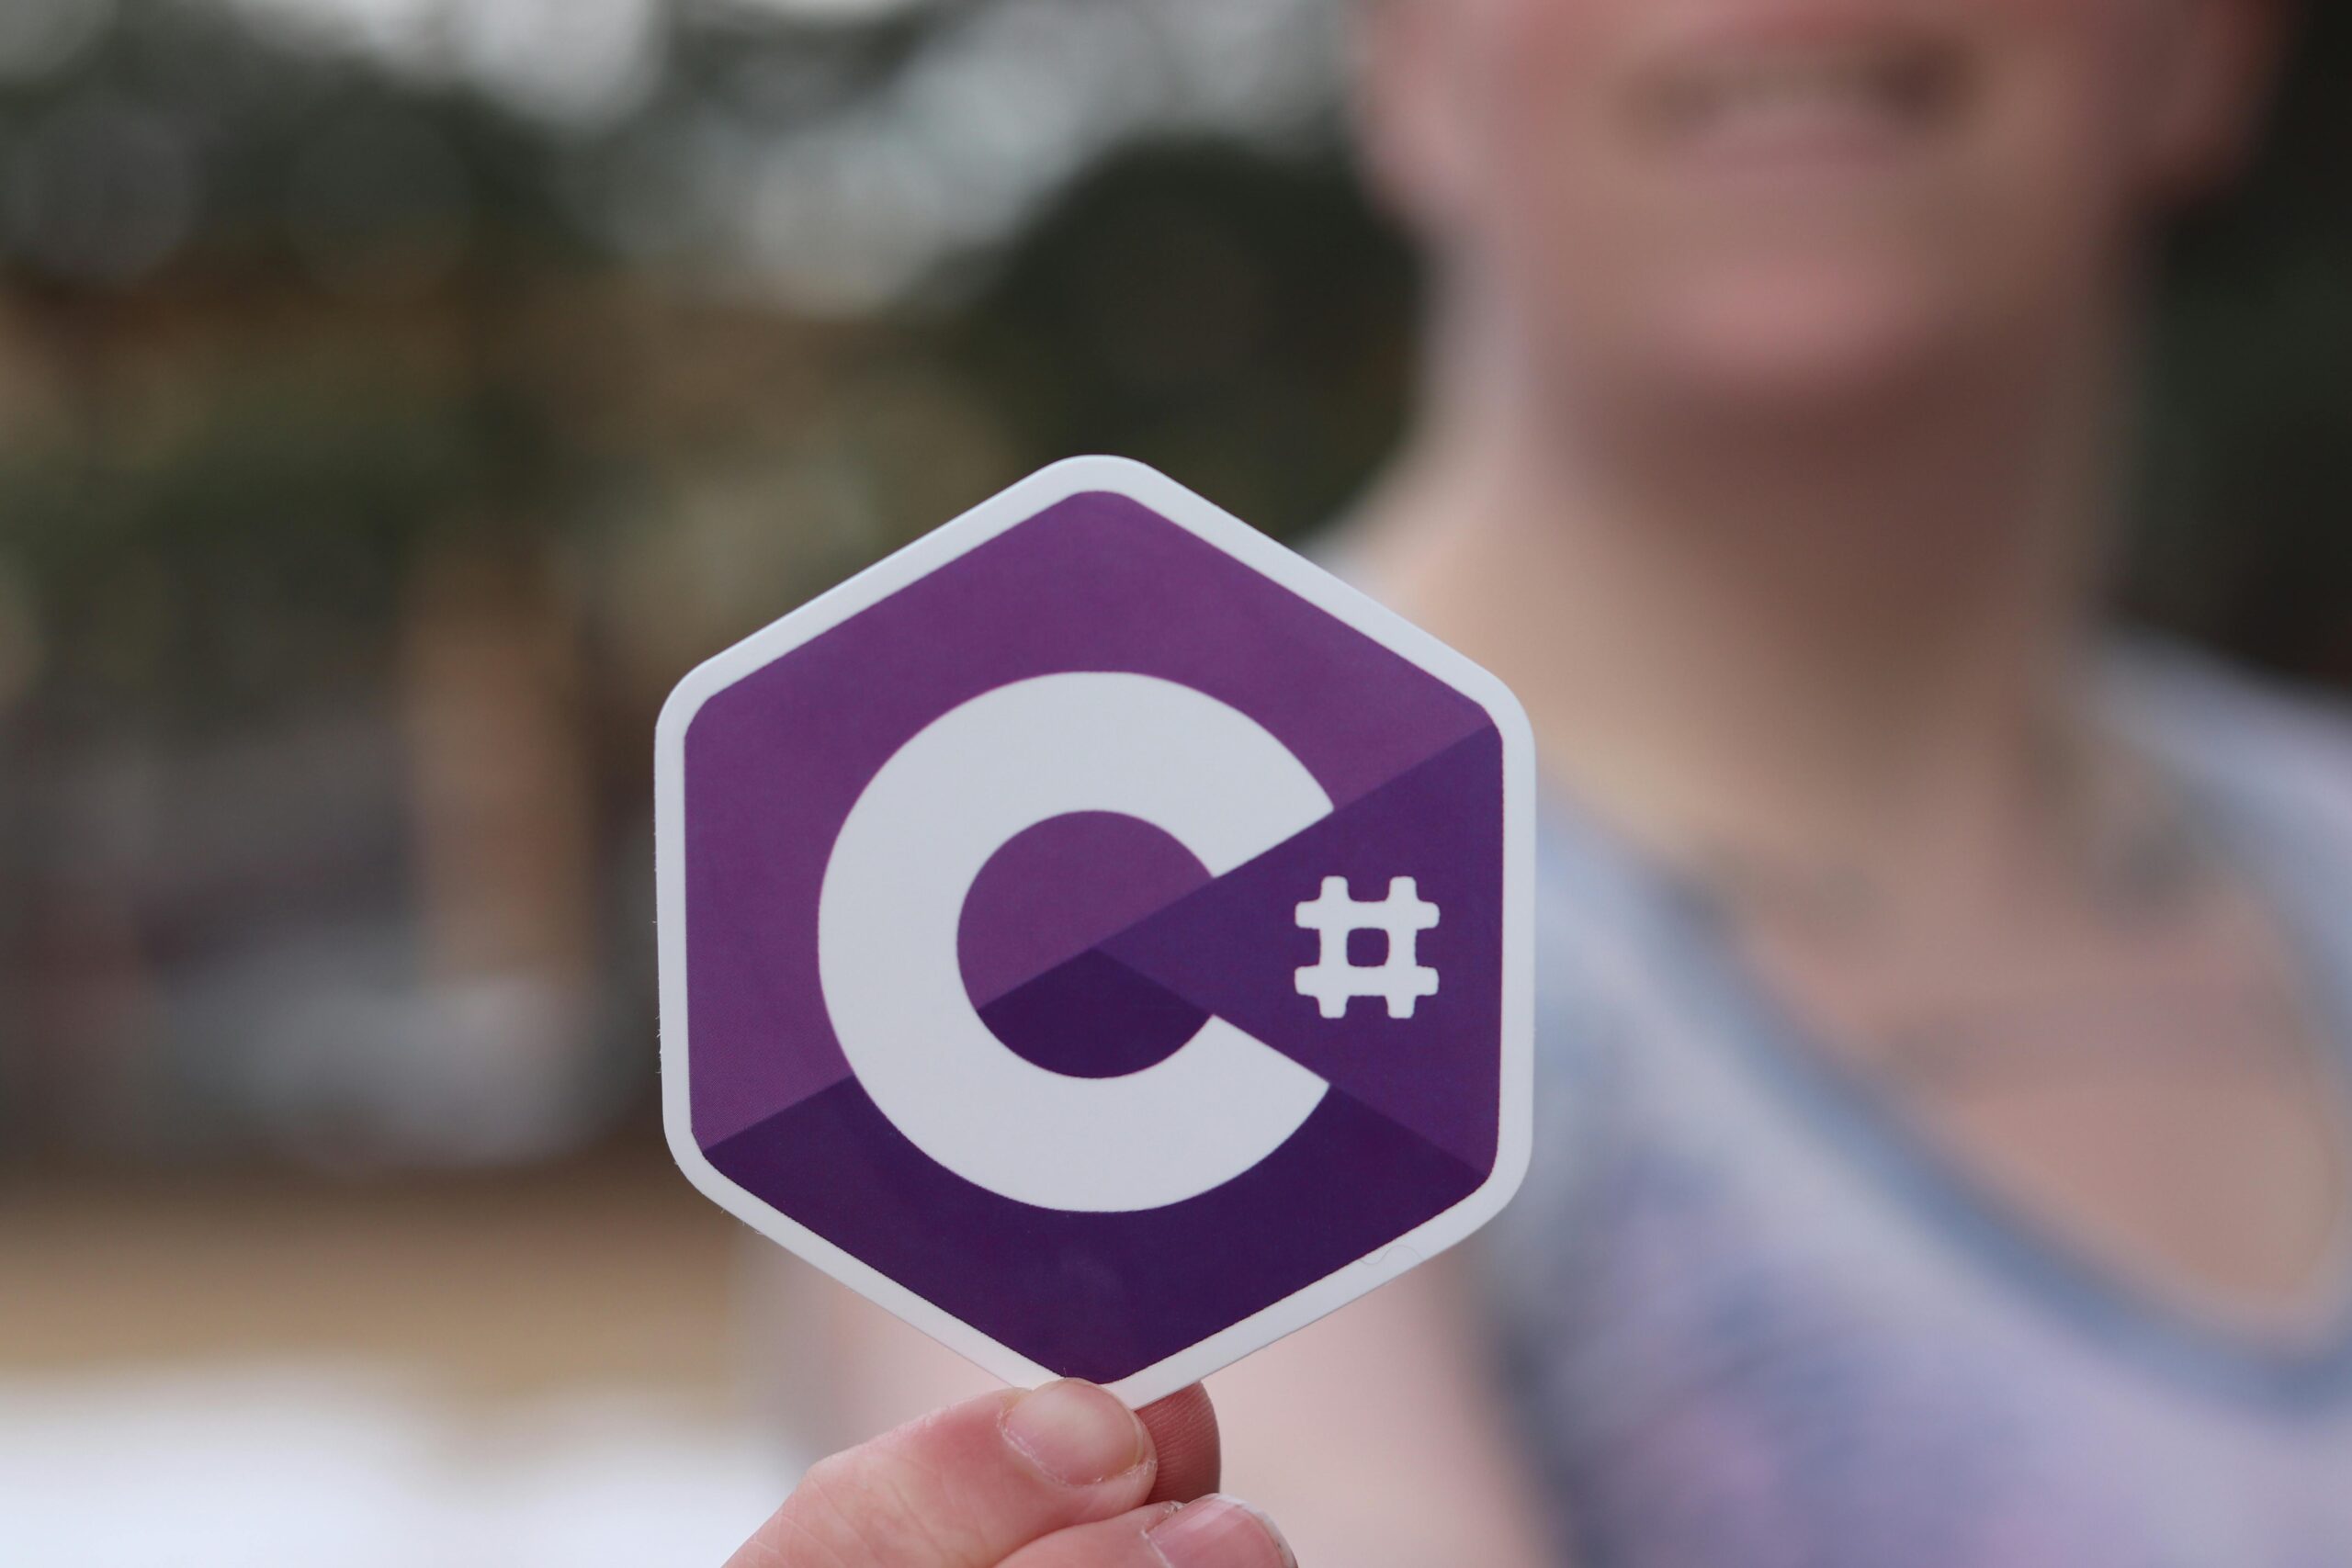 C# is the programming language of the year according to the TIOBE index